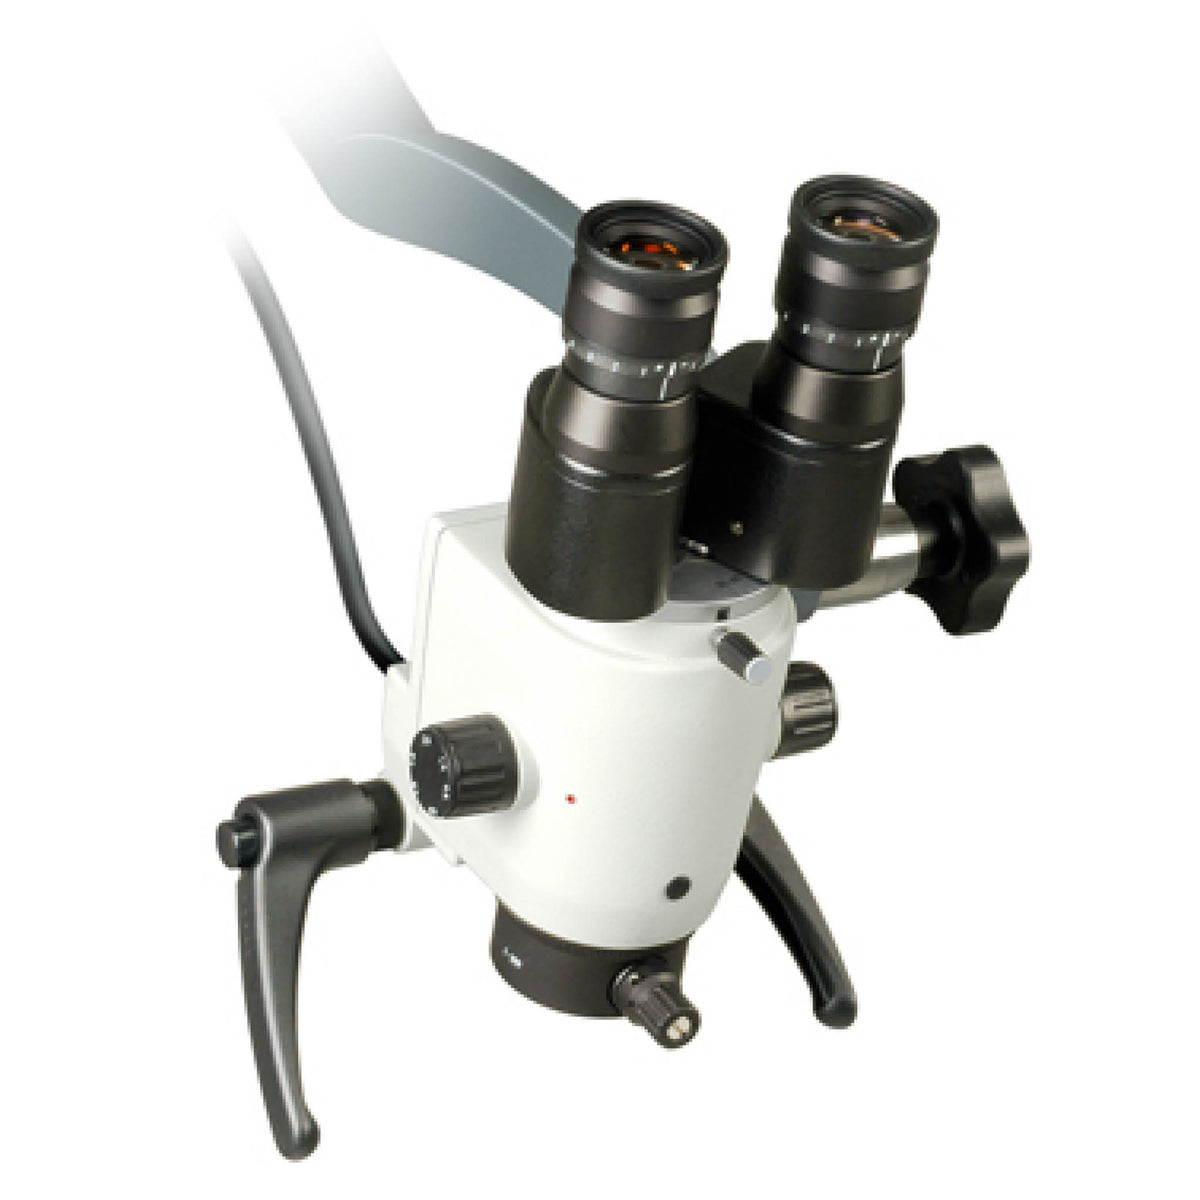 Ecleris OM-100 Operating Microscope designed to cover a wide range of medical disciplines such as ENT, Plastic, Trauma, Neurological and Ophthalmology surgery. 